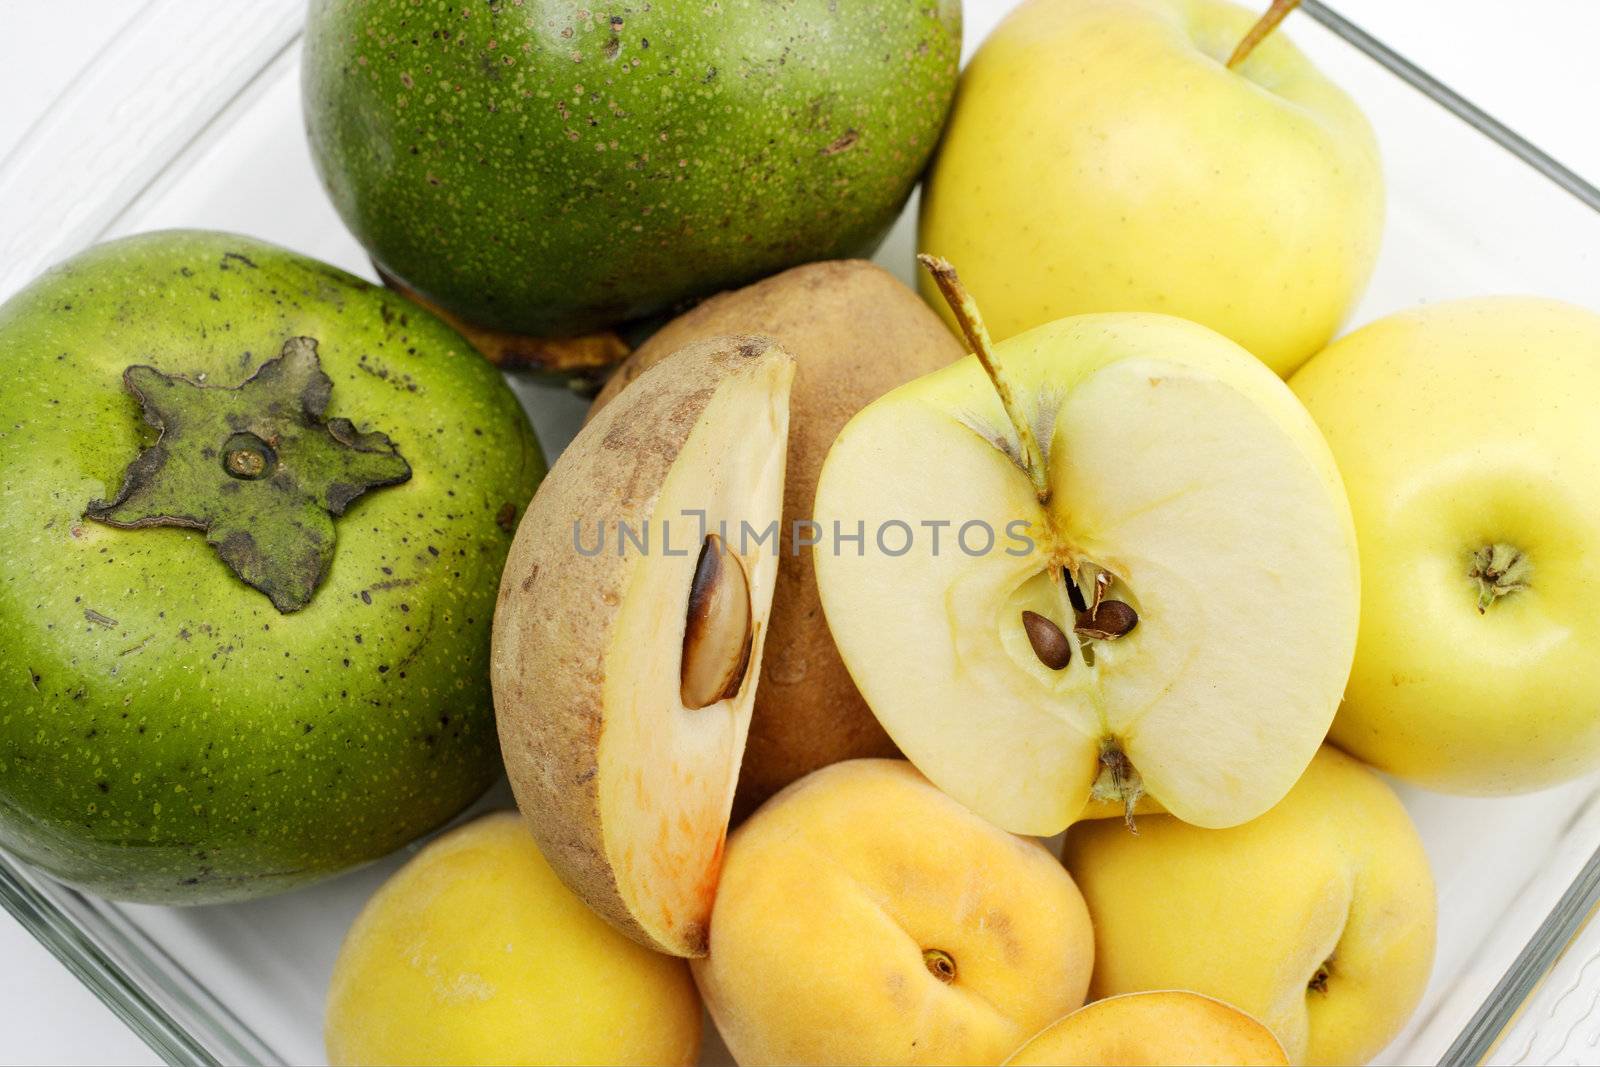 good fruits to have a good health